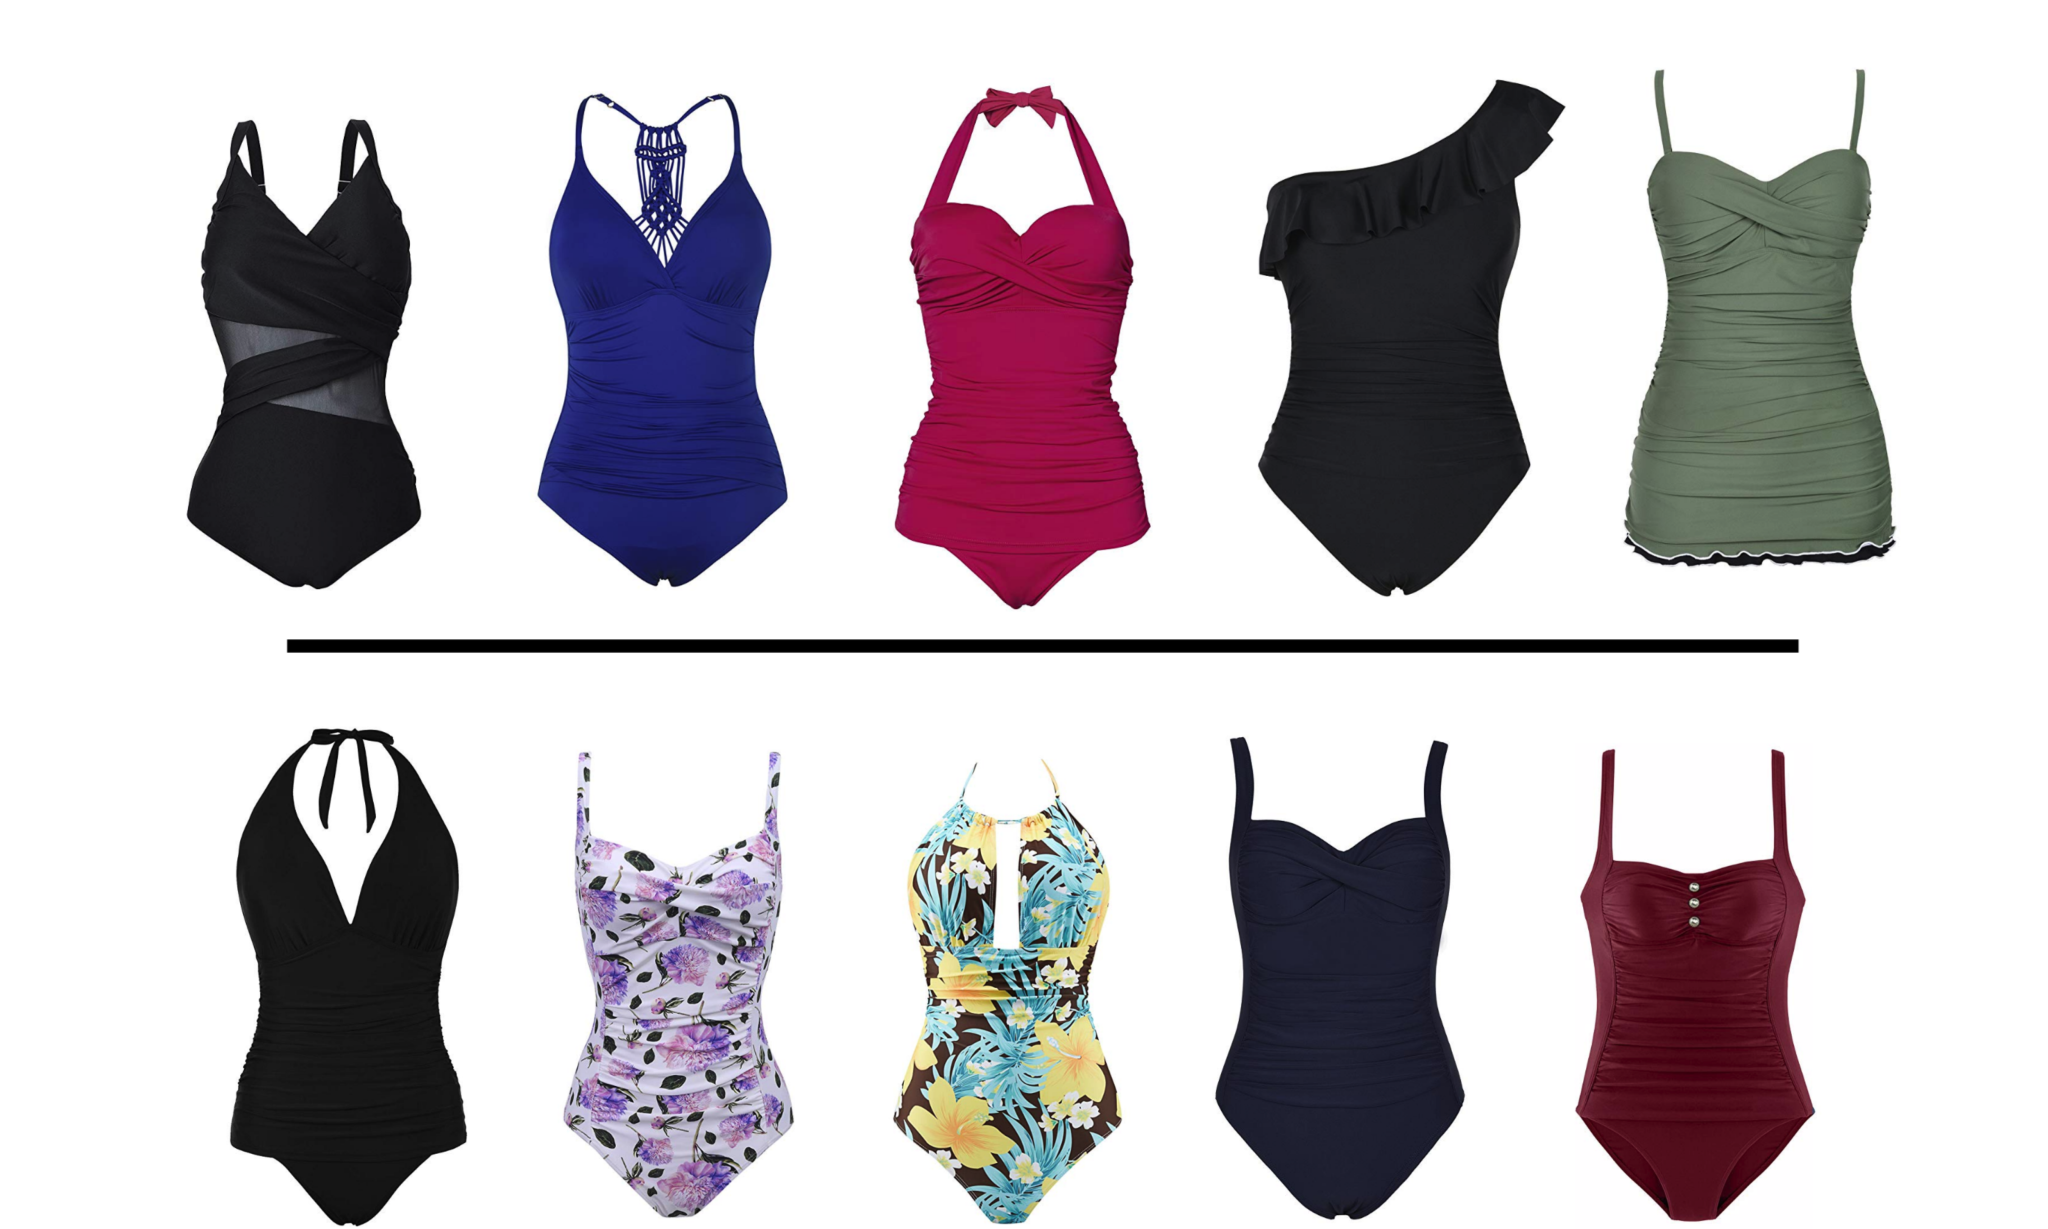 10 Slimming One Piece Suits For Women - Seeing Dandy Blog